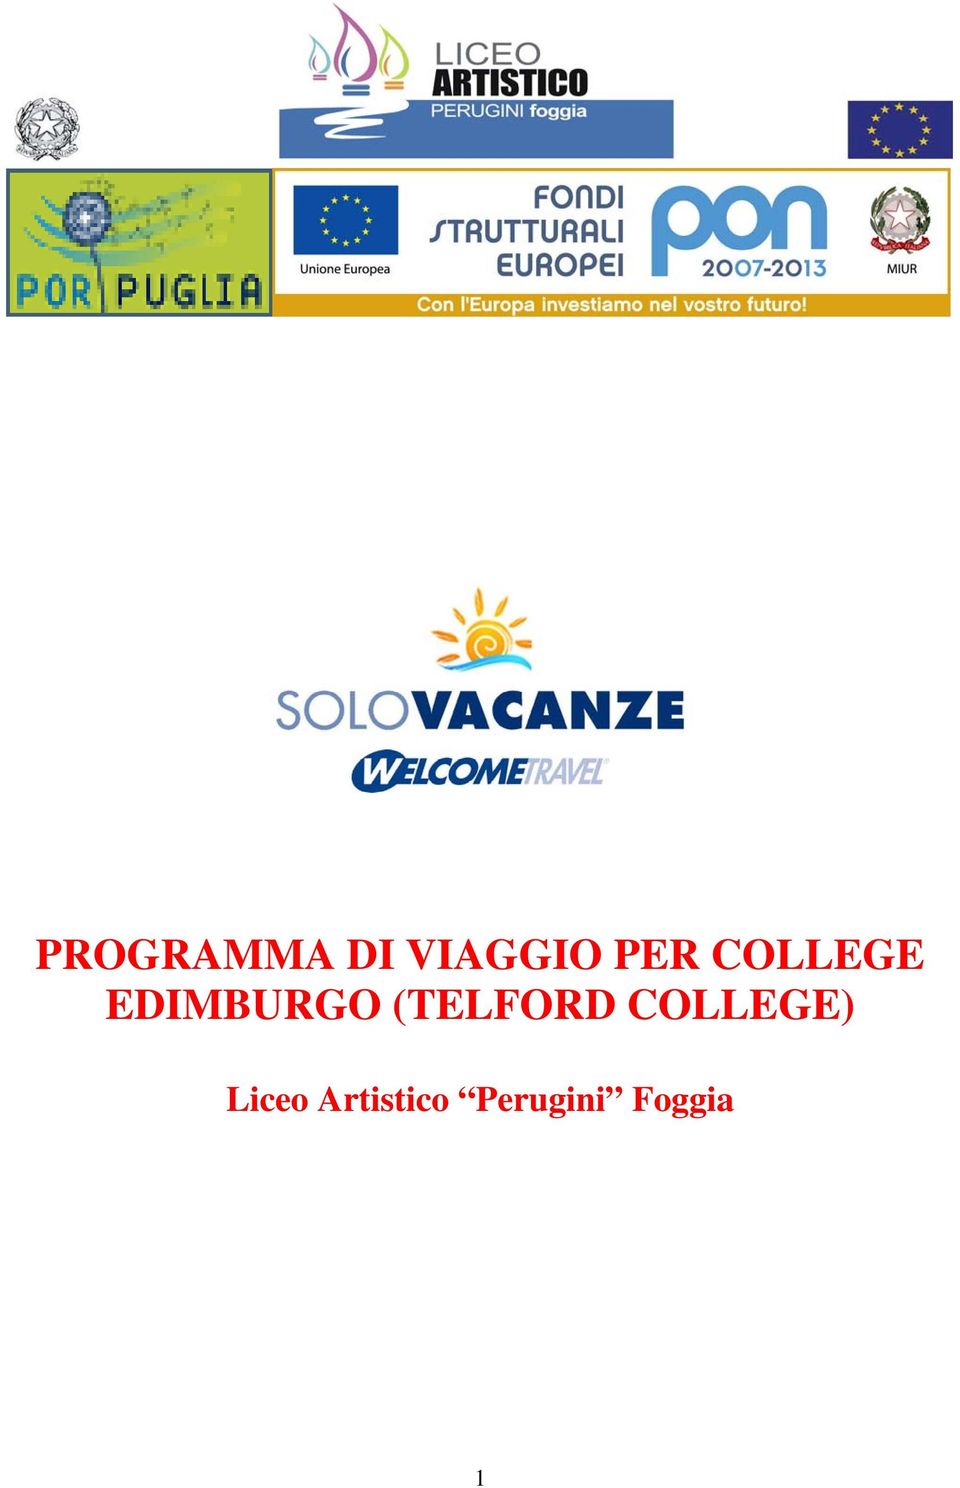 (TELFORD COLLEGE) Liceo